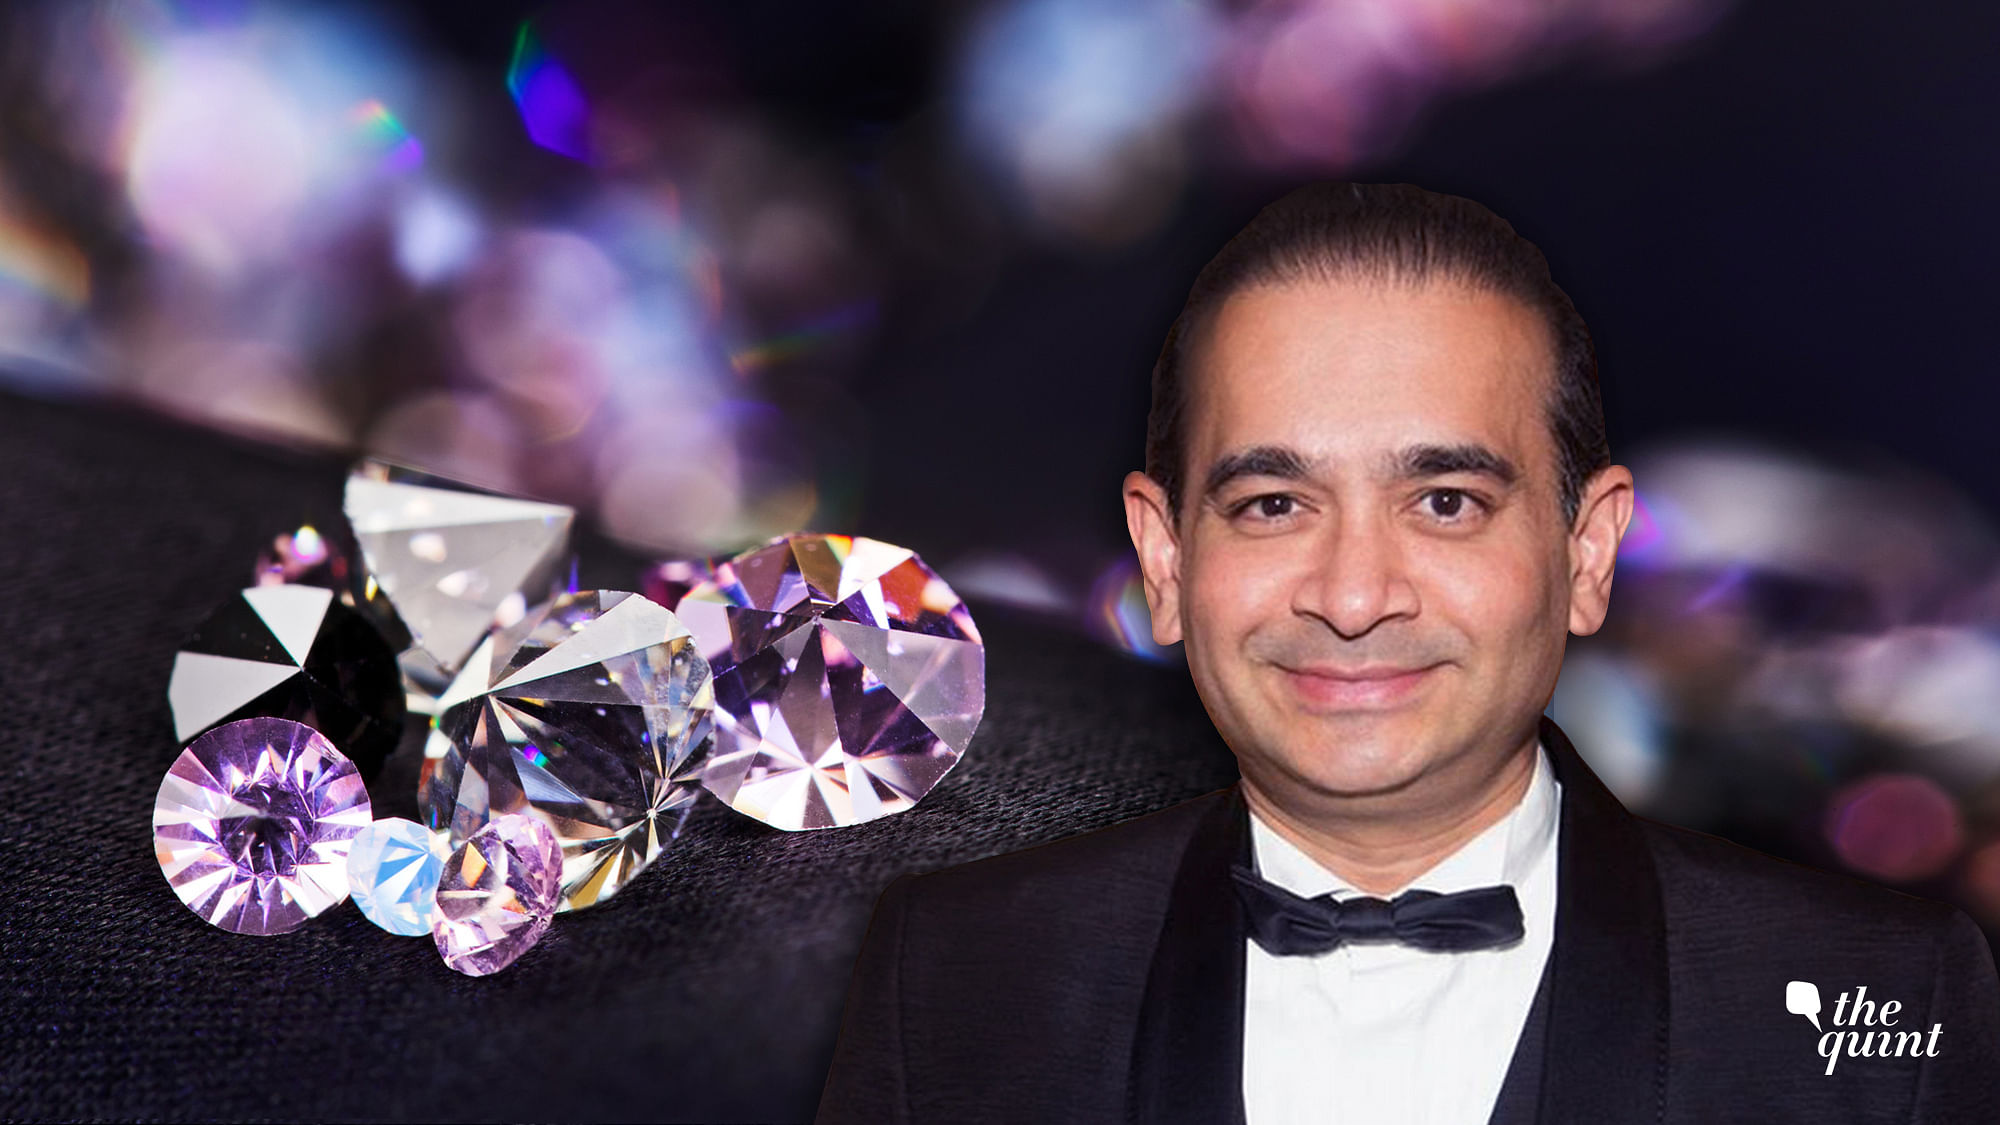 PNB revealed that fraudulent transactions by billionaire jeweller Nirav Modi and related entities amounted to over Rs 11,000 crore.